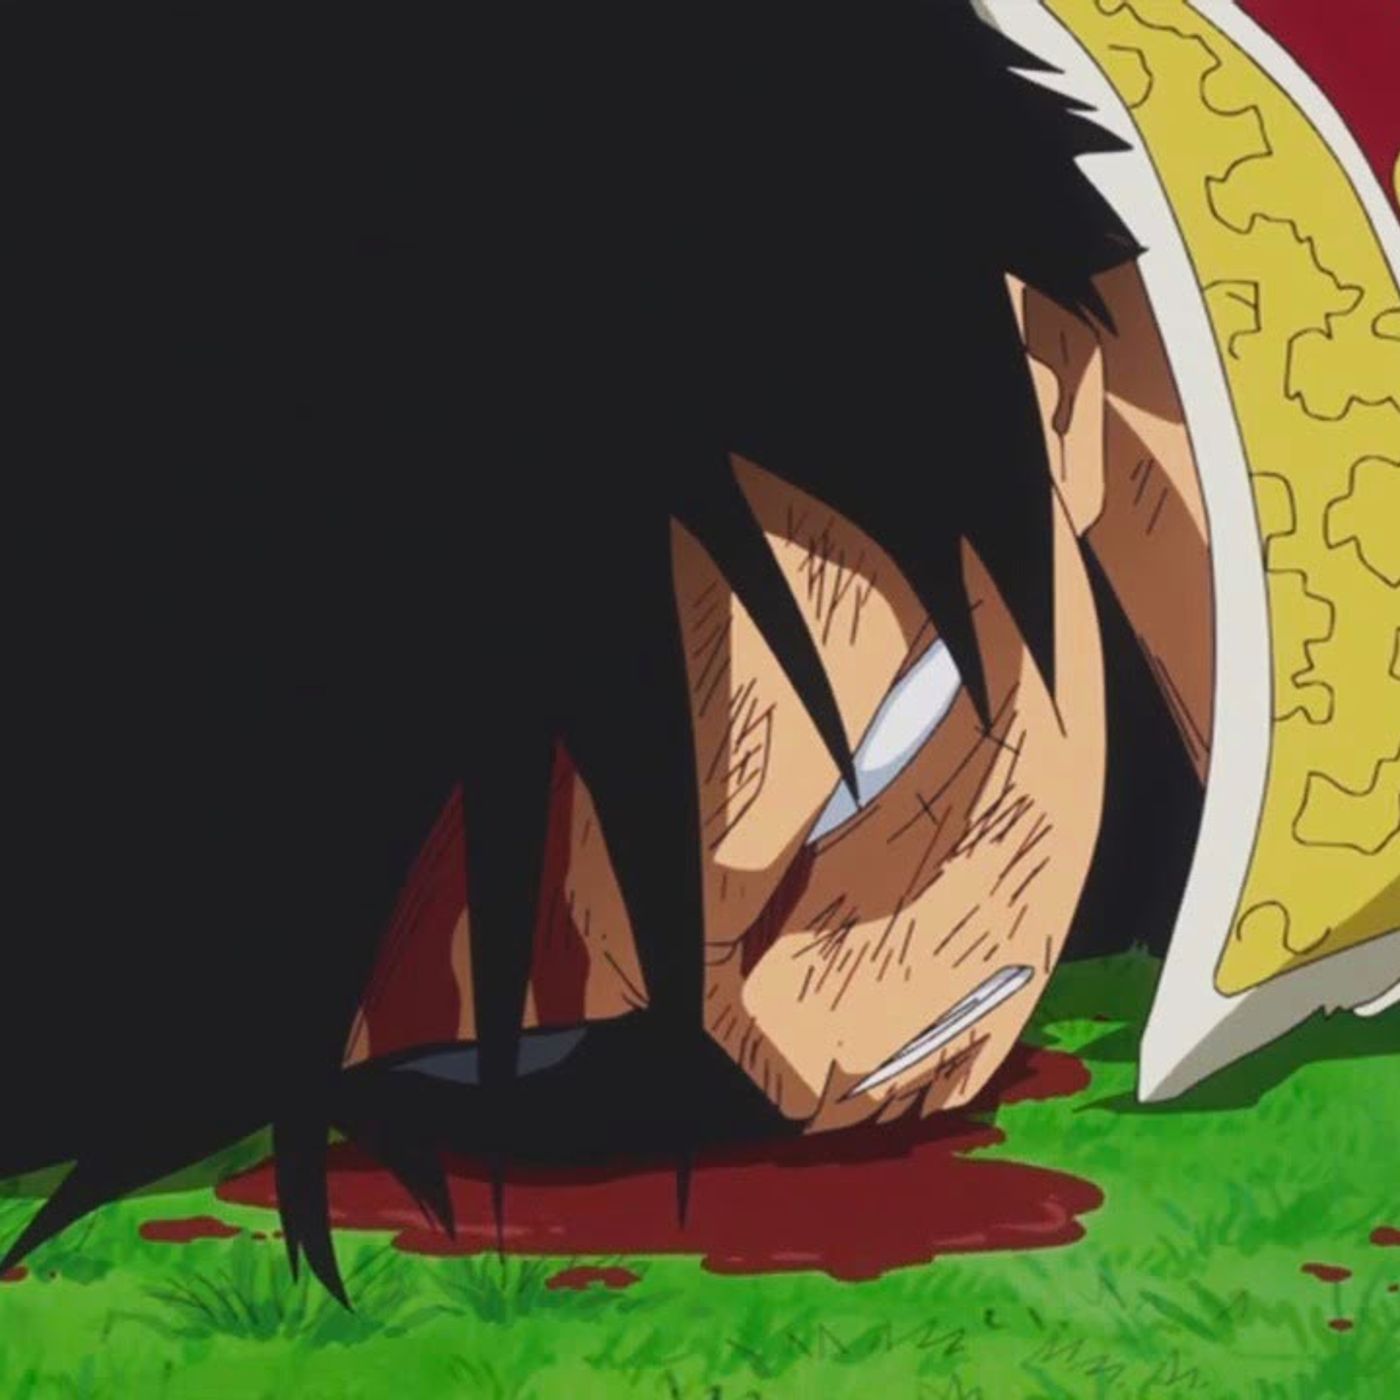 The Best Character In One Piece Died Chapters 1012 1015 By The One Piece Virgin Podchaser